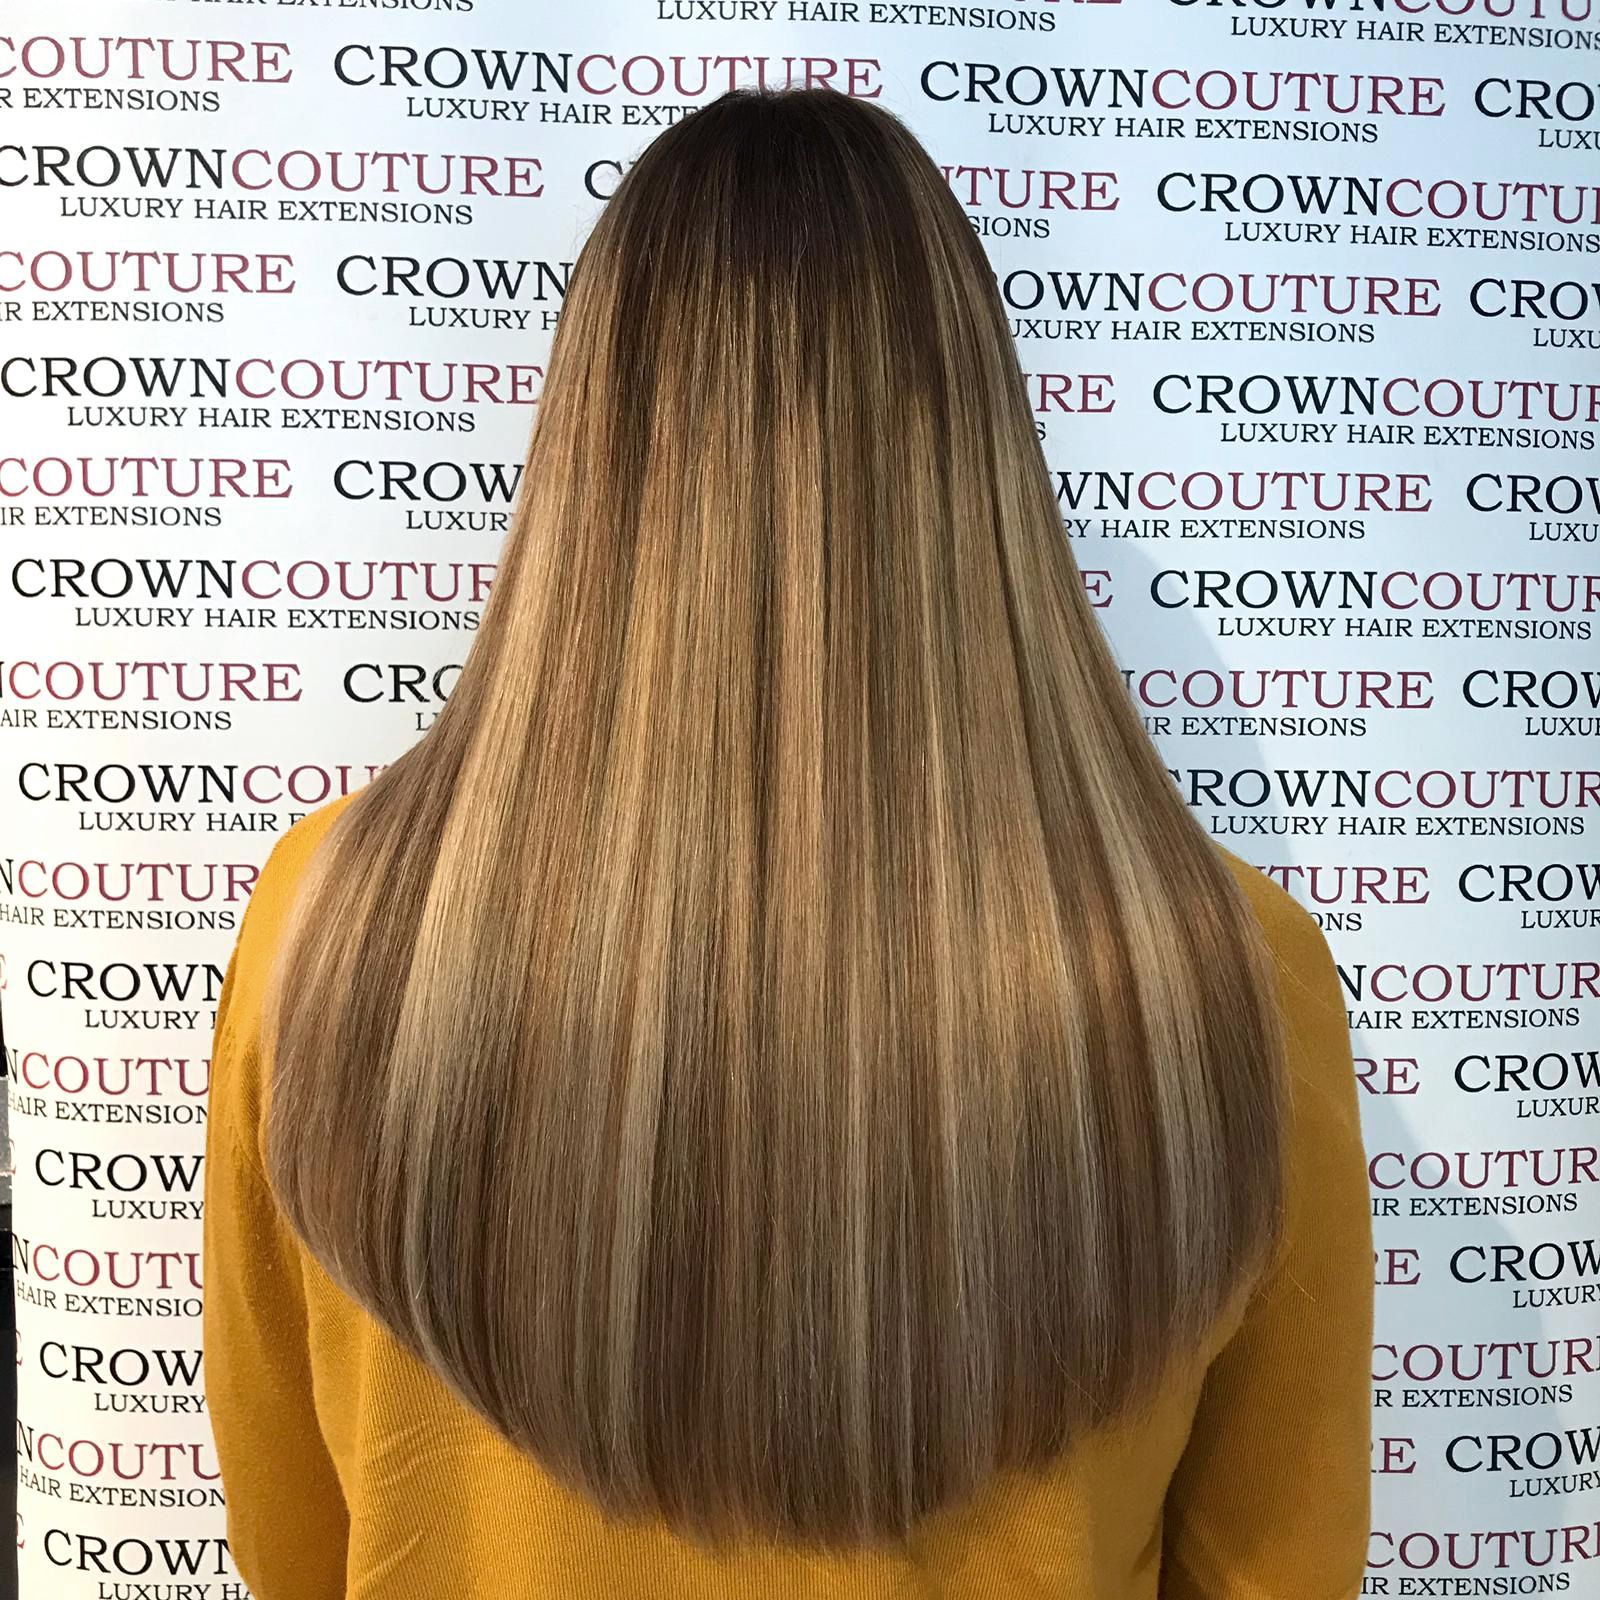 INVISILOCKS hair extensions - Crown Couture